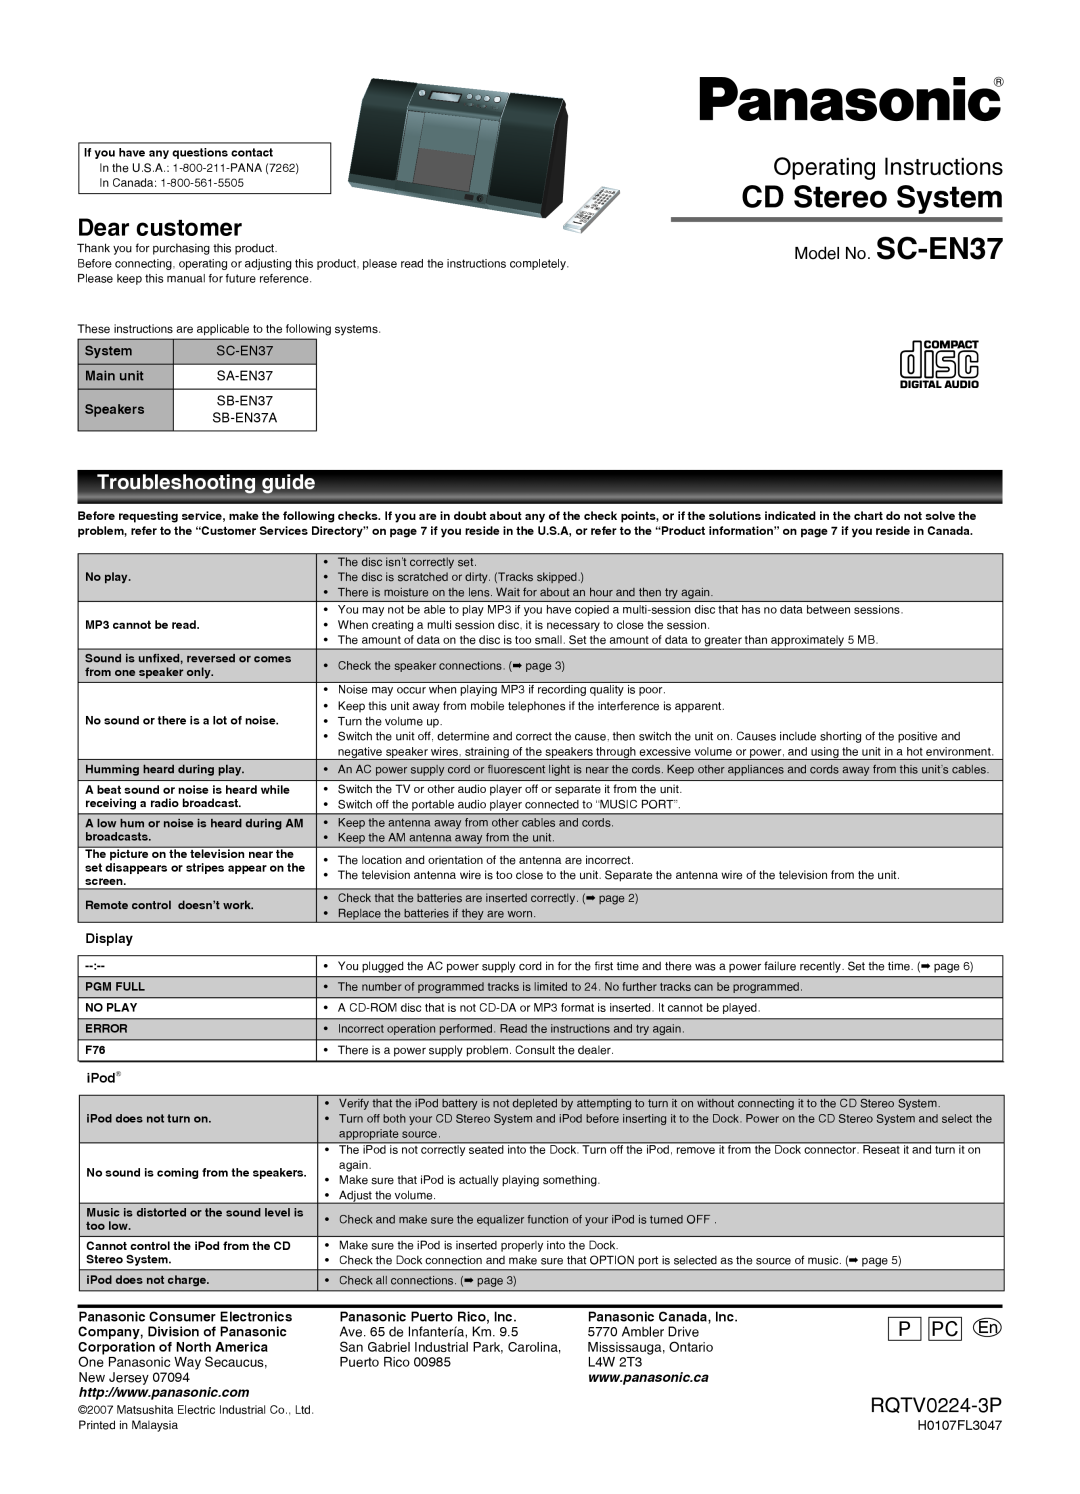 Panasonic manual Troubleshooting guide, CD Stereo System, Operating Instructions, RQTV0224-3P, Model No. SC-EN37 